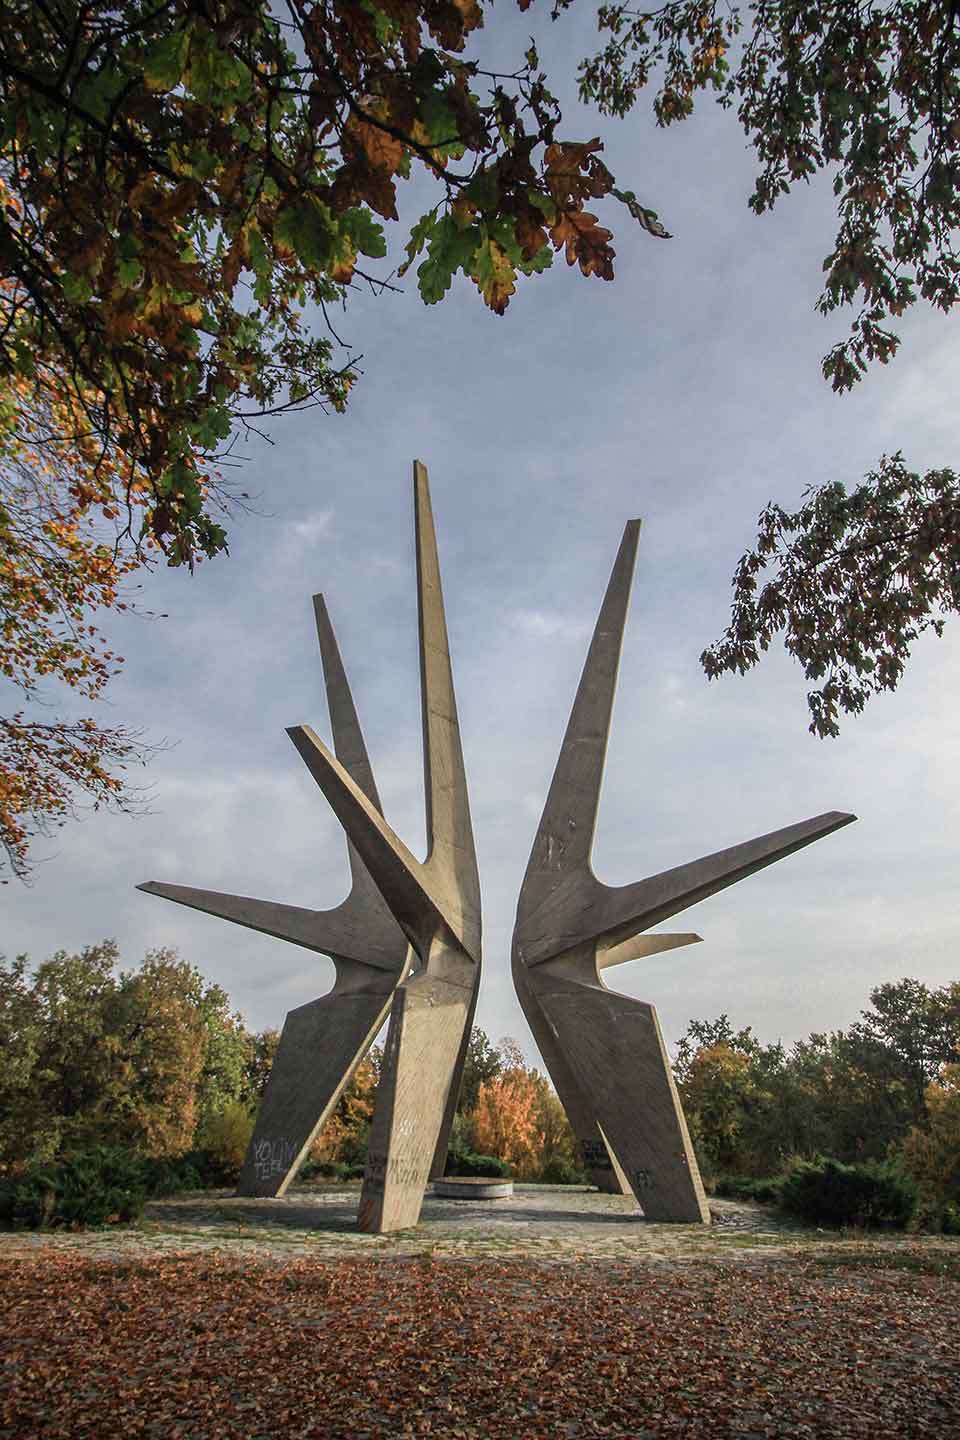 A photograph of an outdoor monument with three geometric figures rising up out of the ground